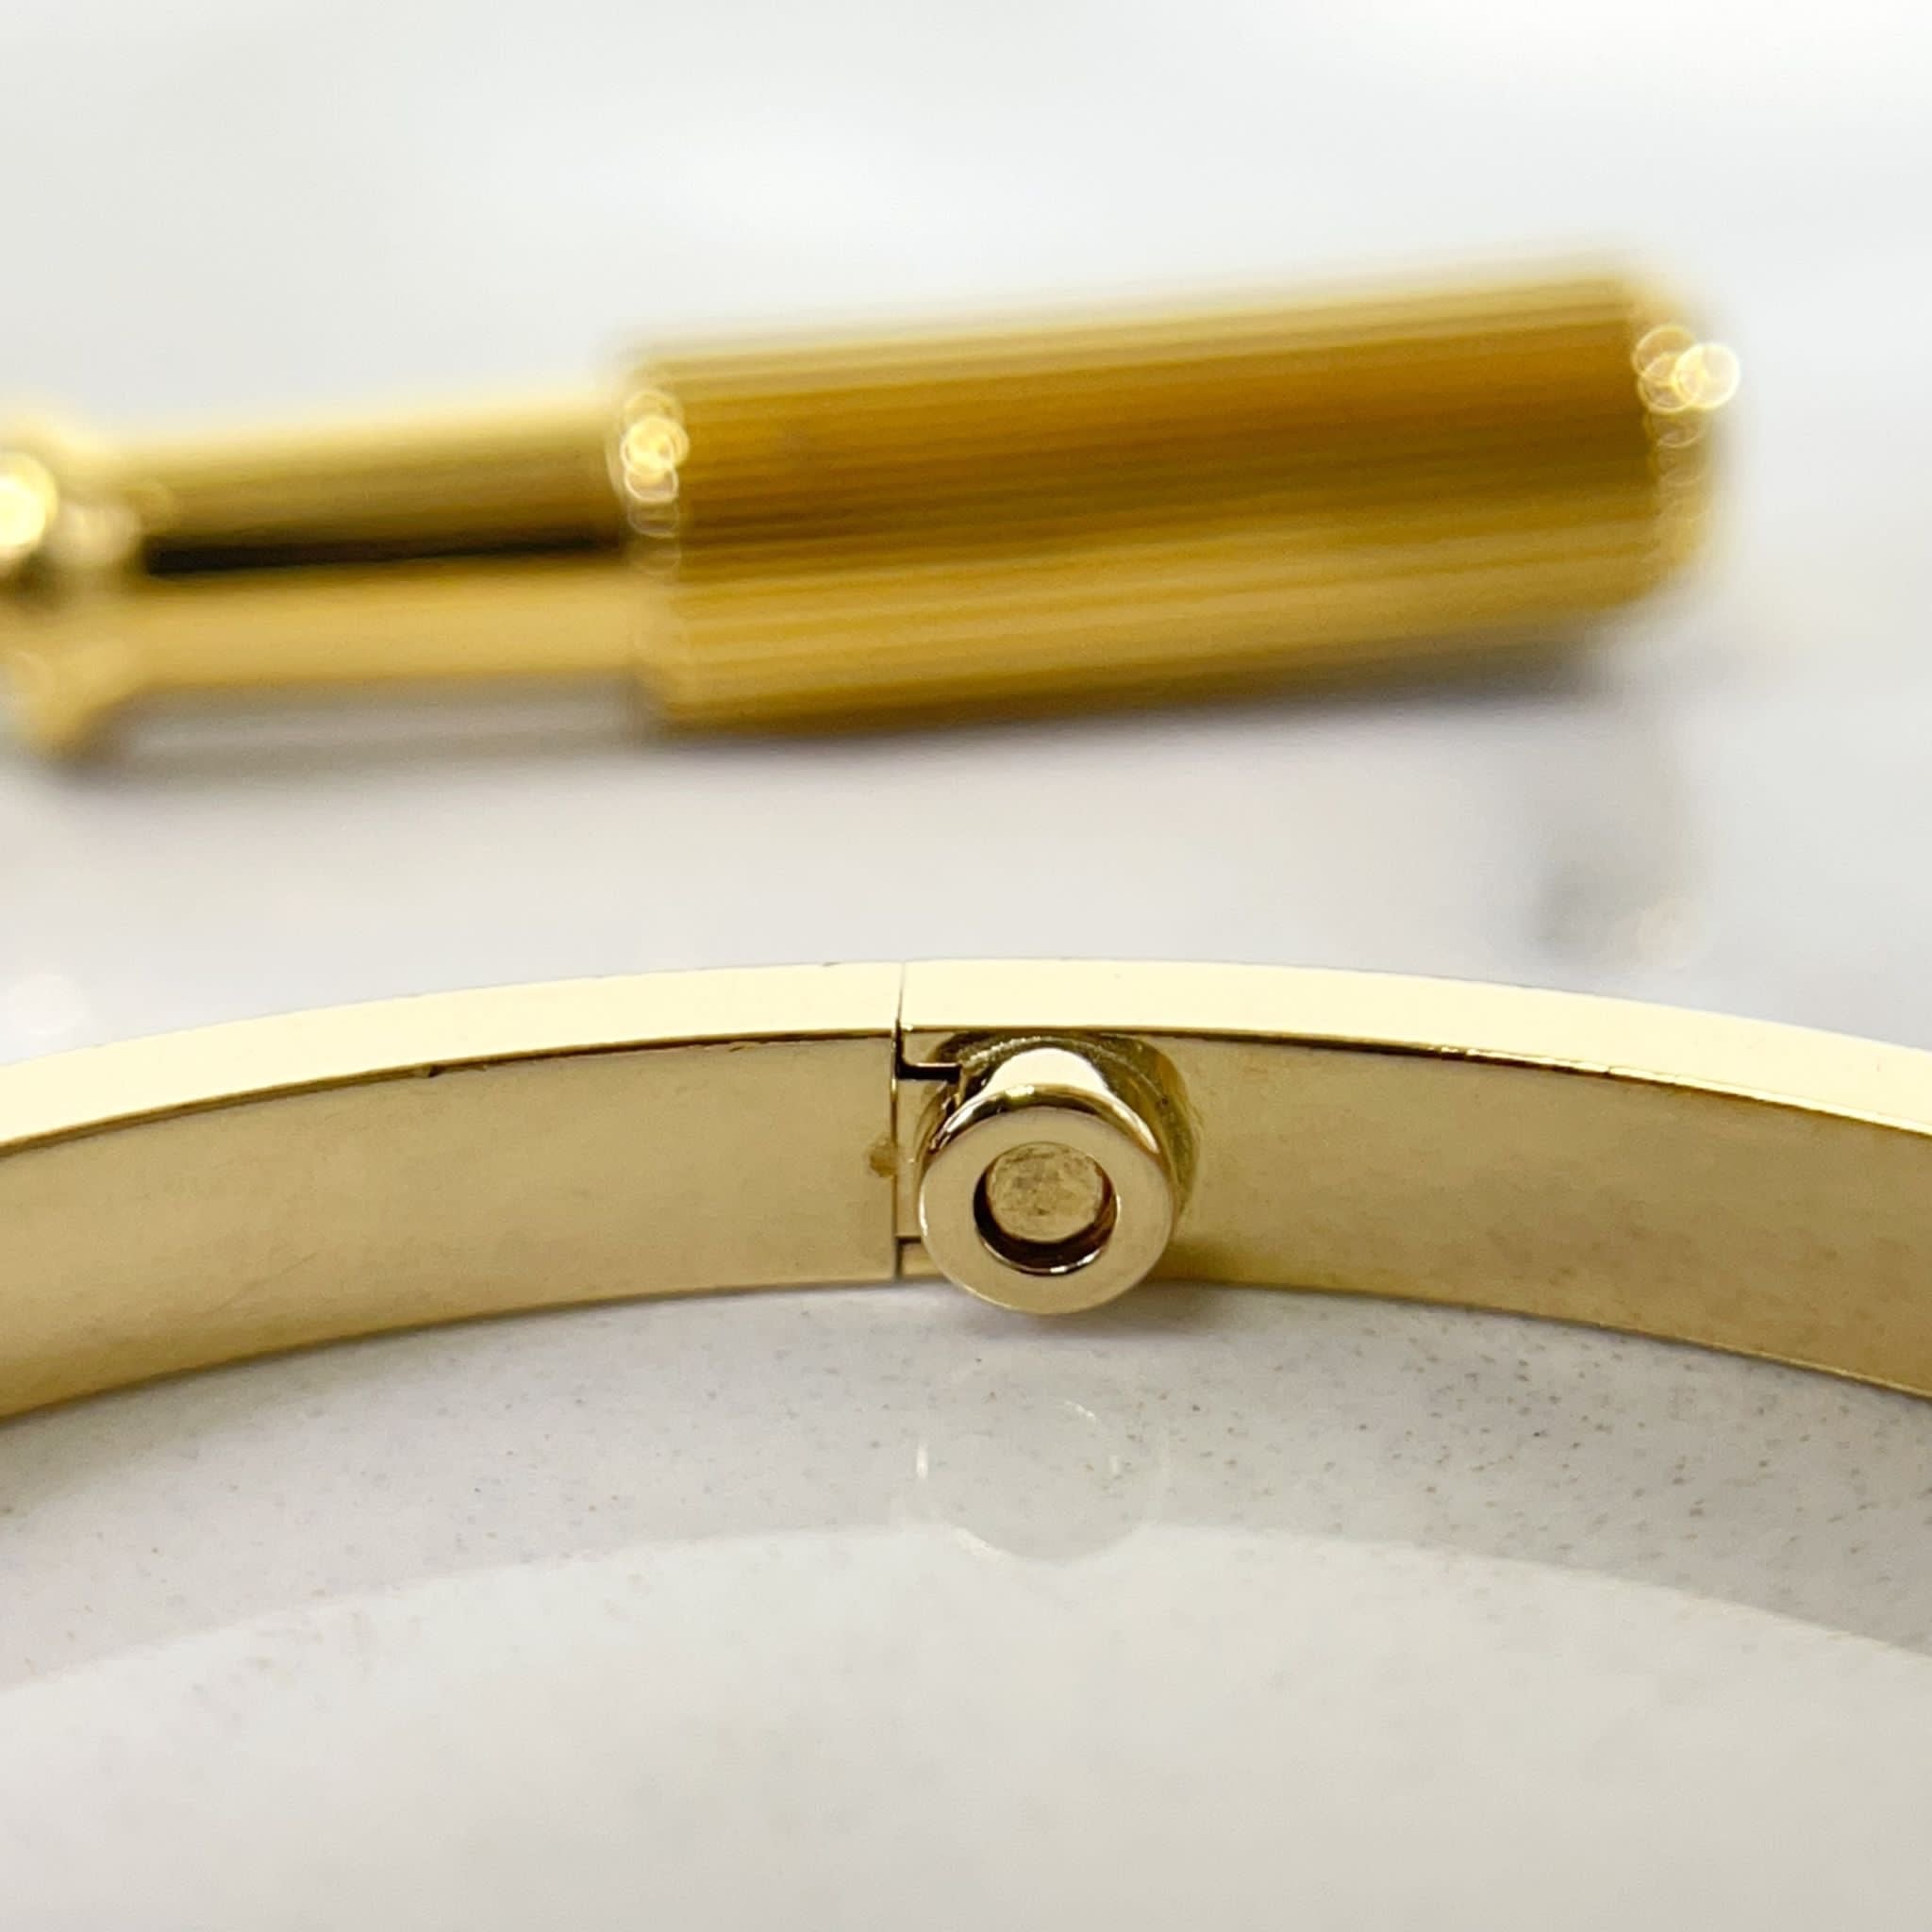 Sold at Auction: 18CT GOLD 'LOVE' BRACELET, CARTIER Accompanied by a Cartier  box, screwdriver, facsimile receipt and Certificate of Authenticity.